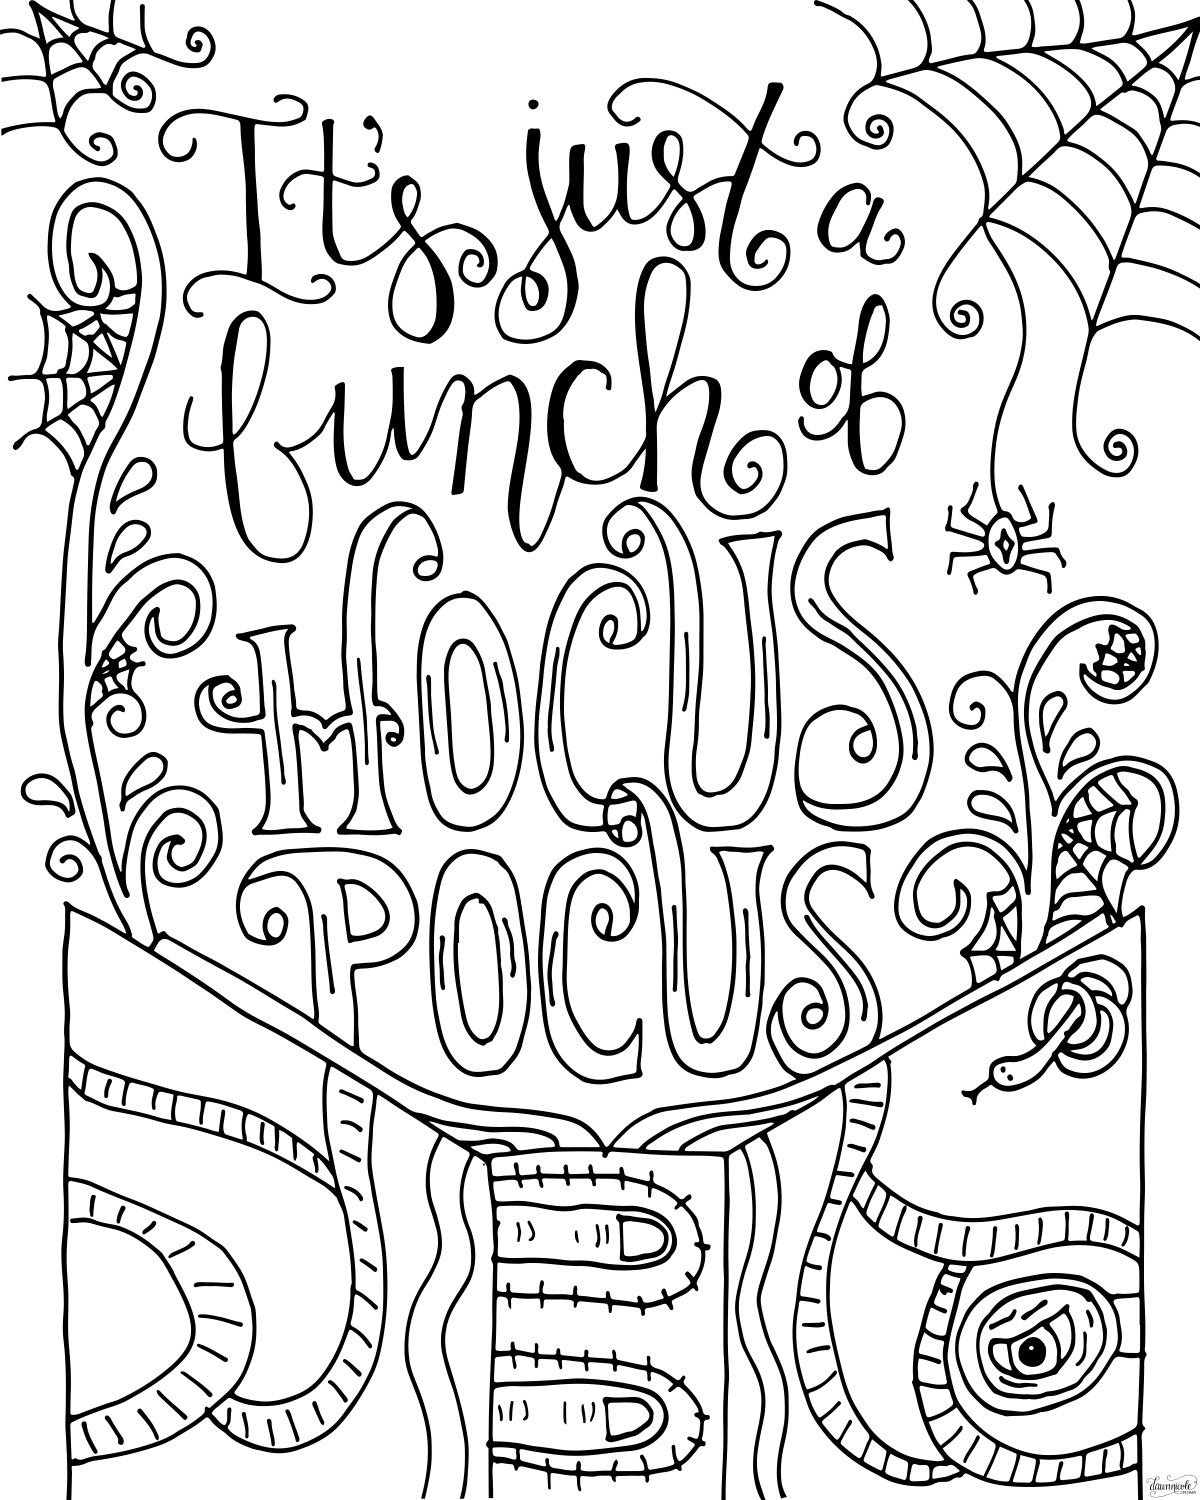 Hocus Pocus Coloring Page | Fall coloring pages, Halloween ...